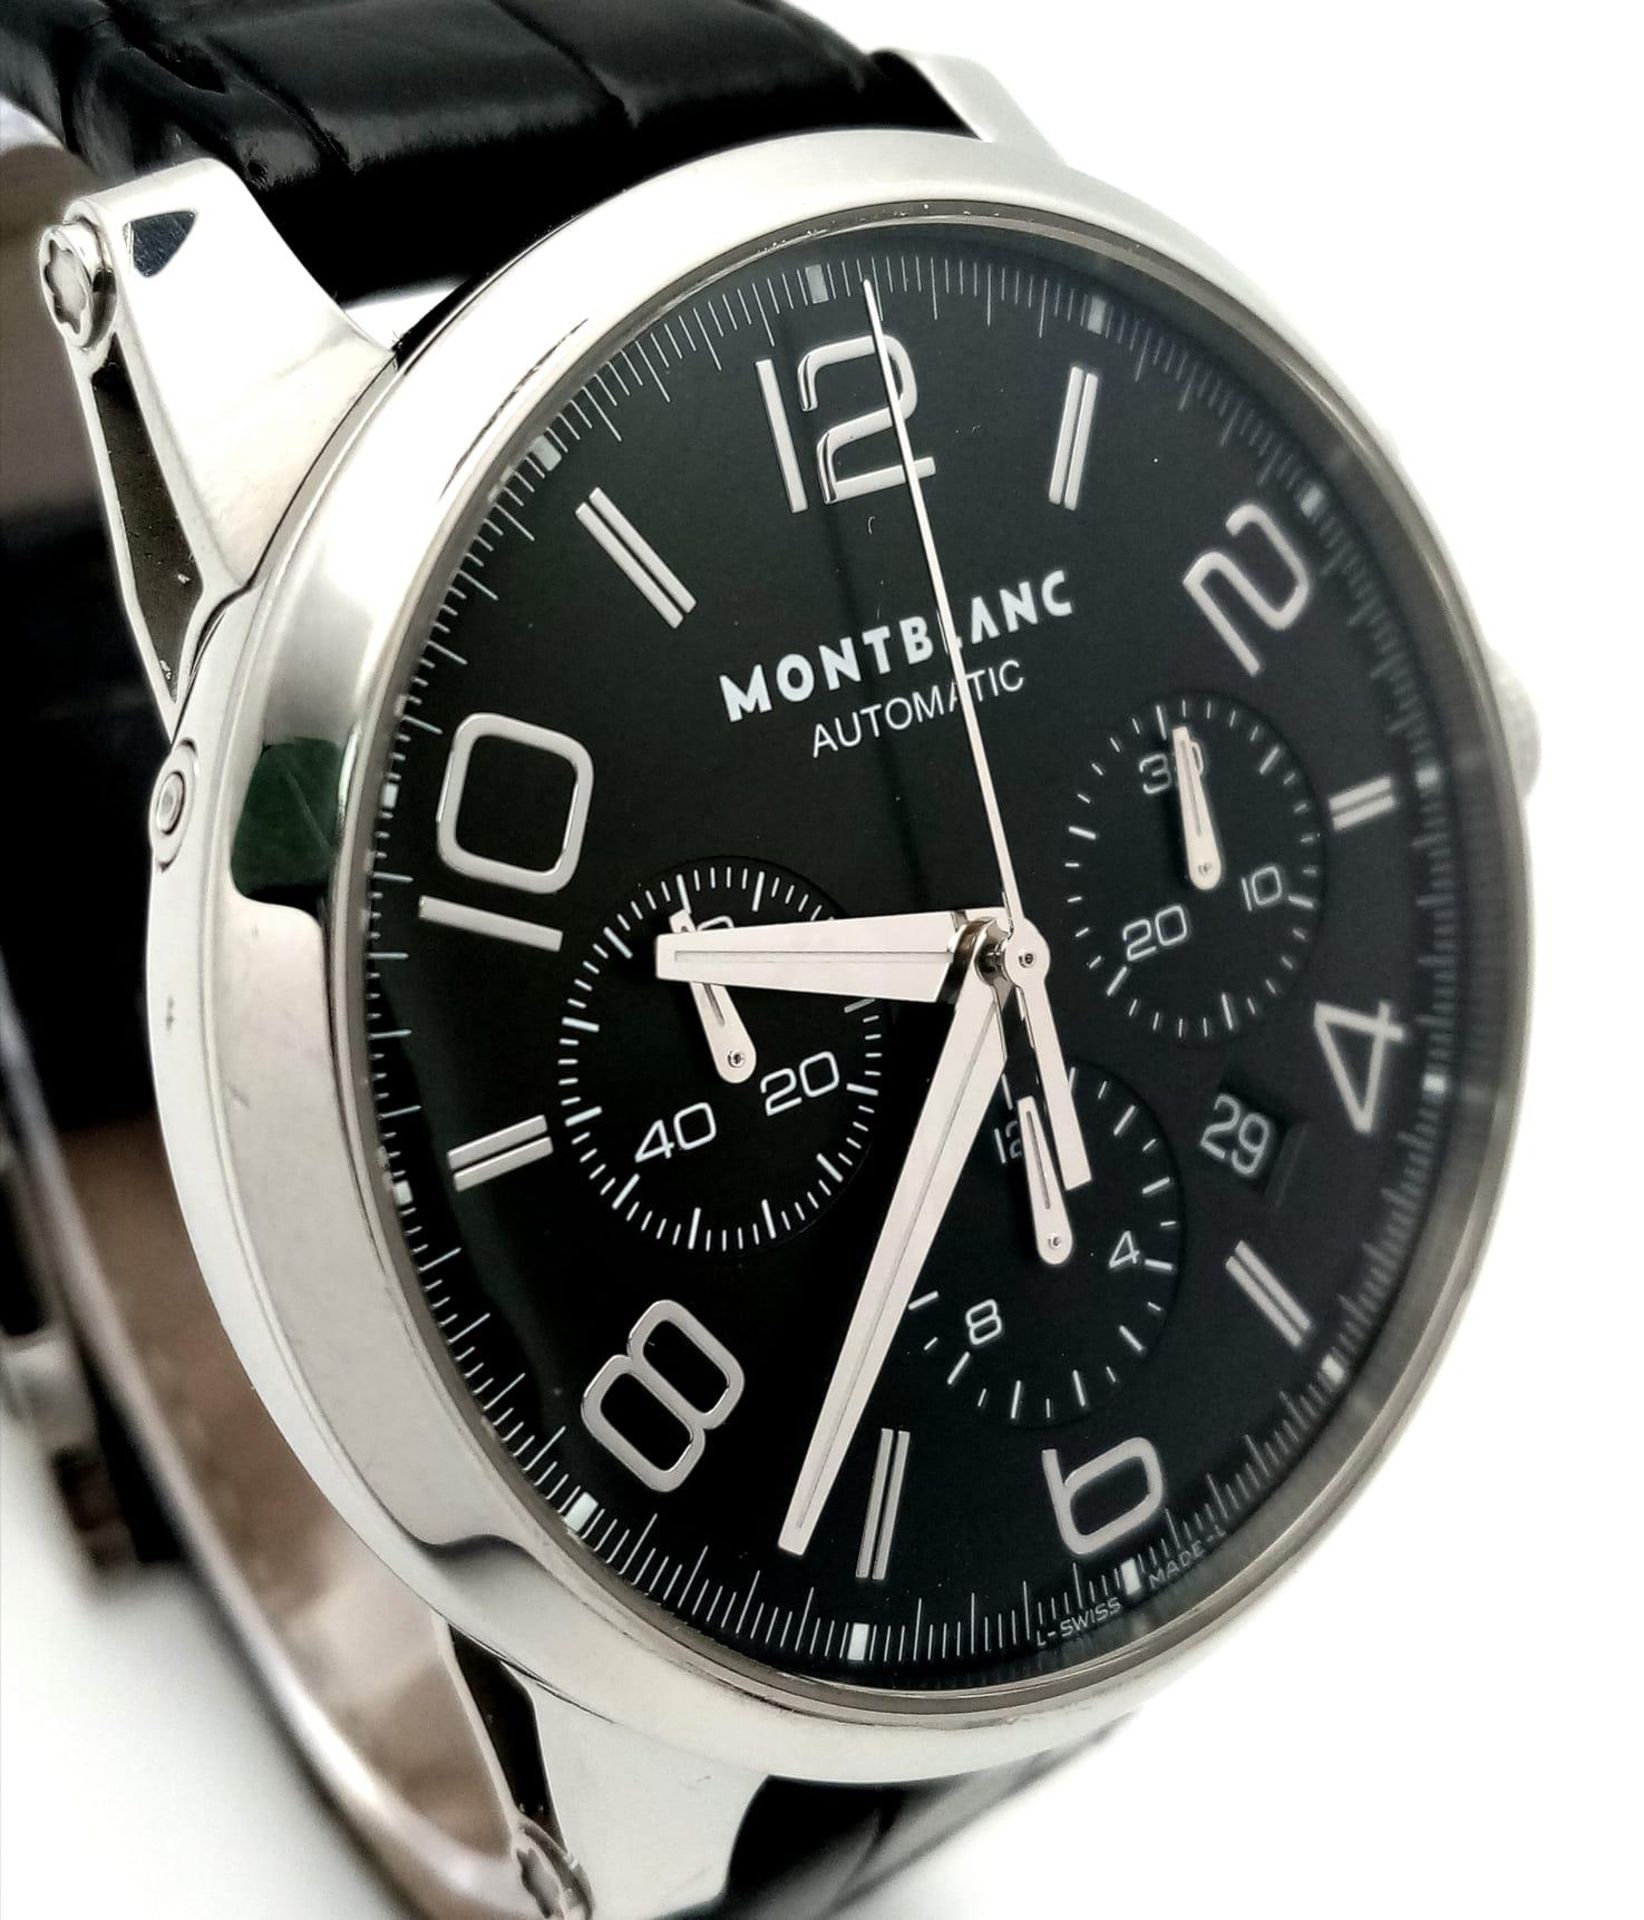 A "MONTBLANC" AUTOMATIC CHRONOGRAPH WITH 3 SUBDIALS ,STUNNING BLACK FACE , COMES WITH BOX AND - Image 2 of 8